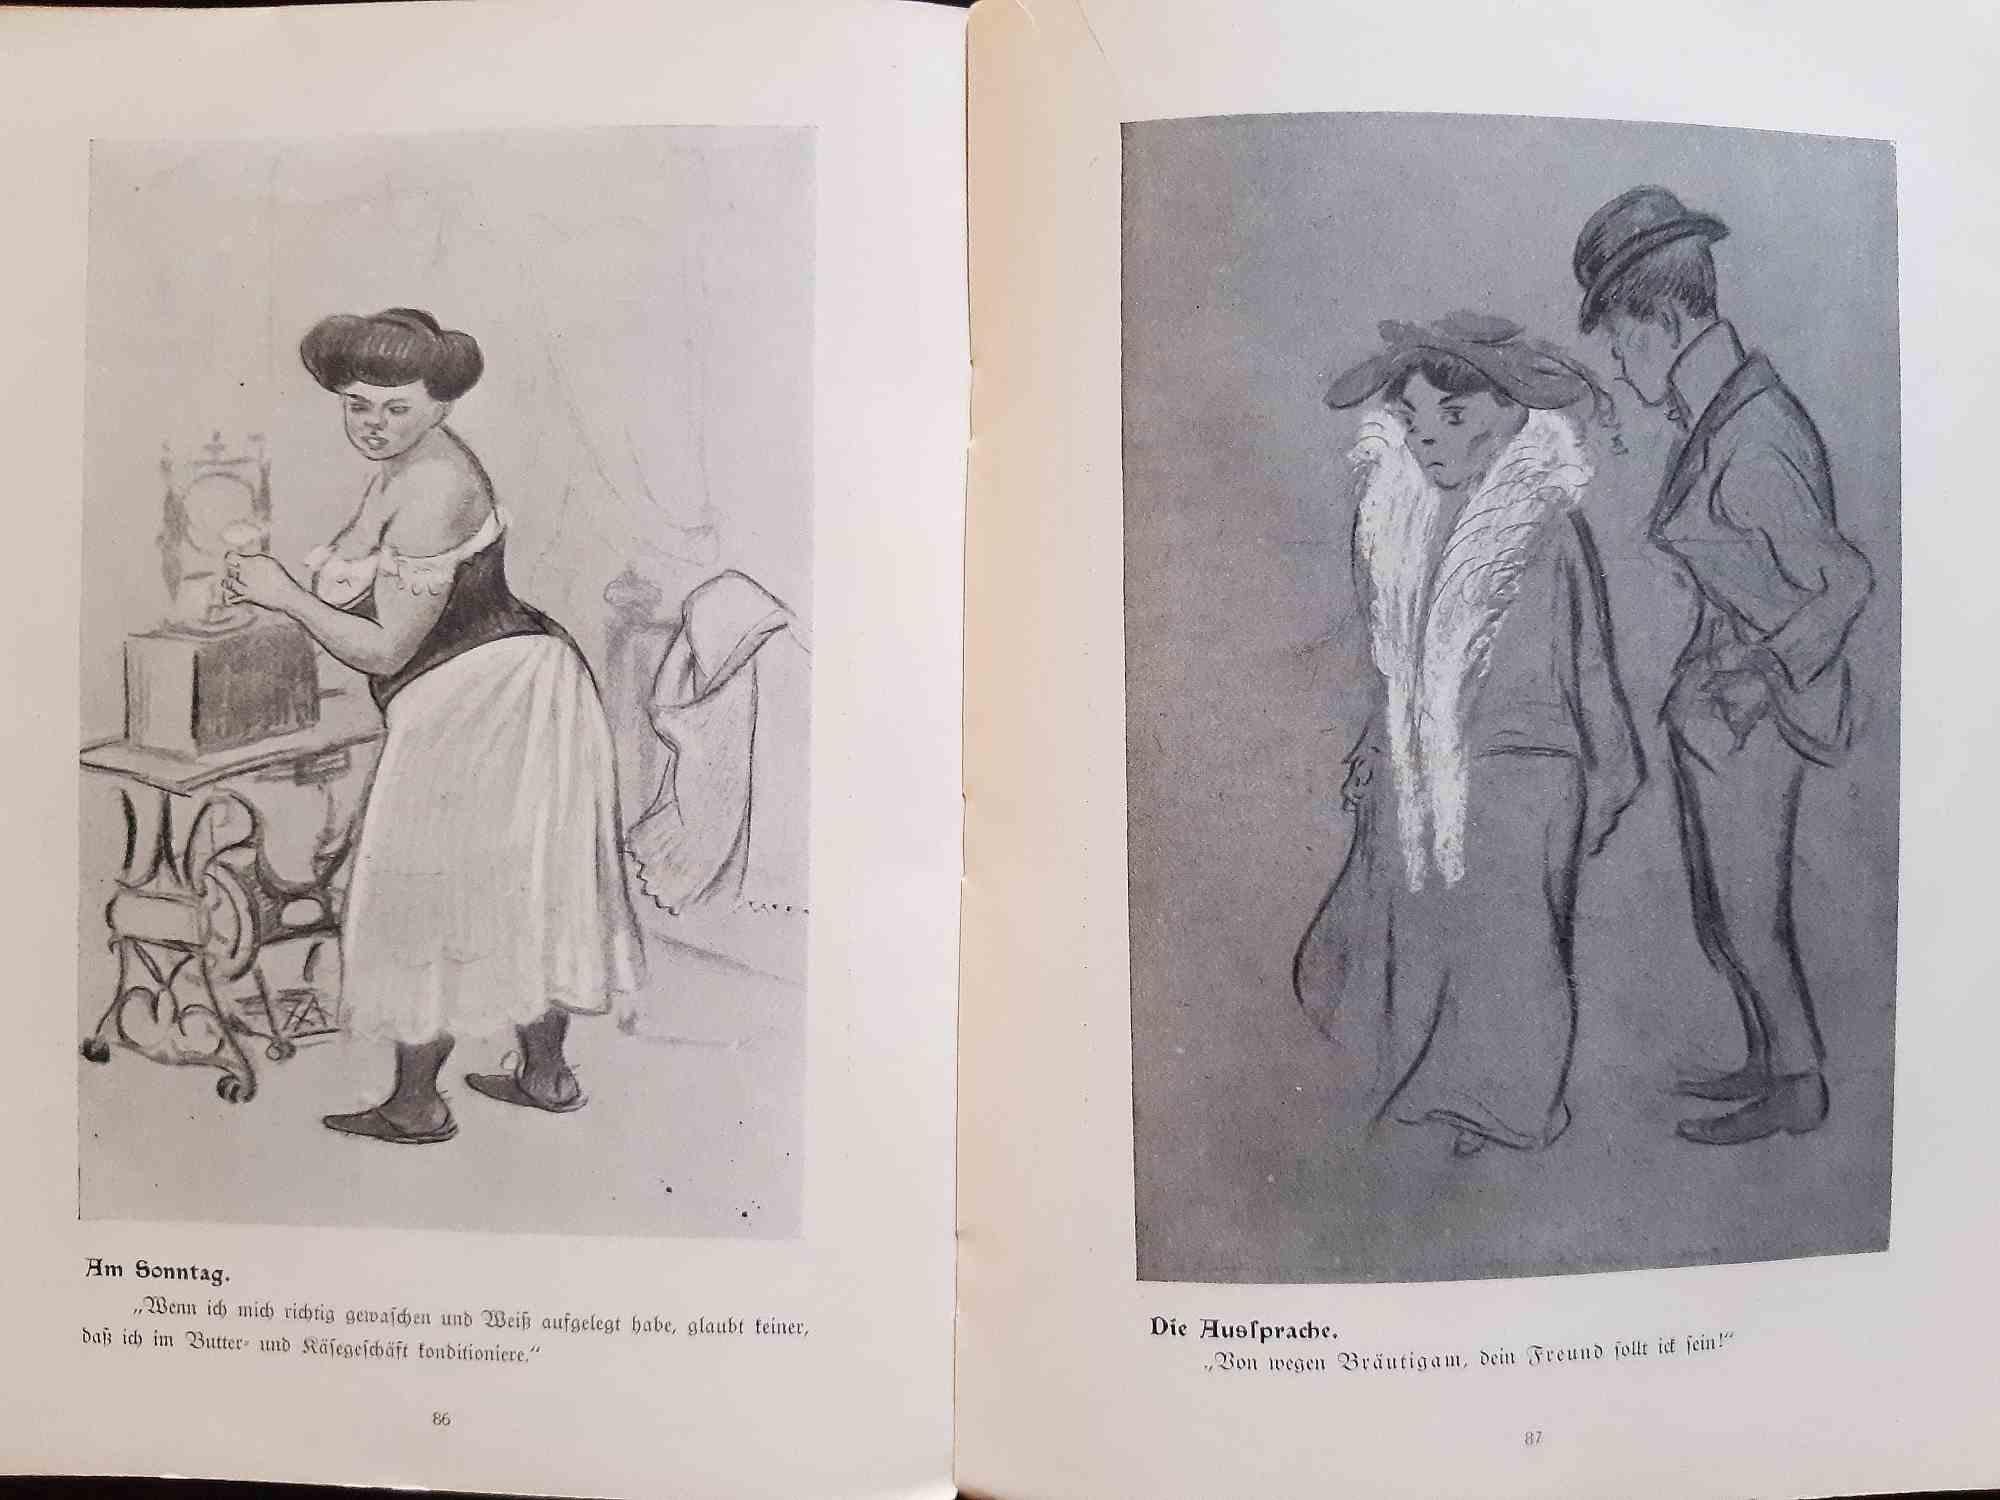 Kinder der strasse is a modern rare book illustrated by Heinrich Zille (Radeburg, 10 January 1858 - Berlin, 9 August 1929) in 1908.

Original First Edition.

Published by Verlag der lustigen blatter, Berlin.

Format: in 8°. The dimensions and the